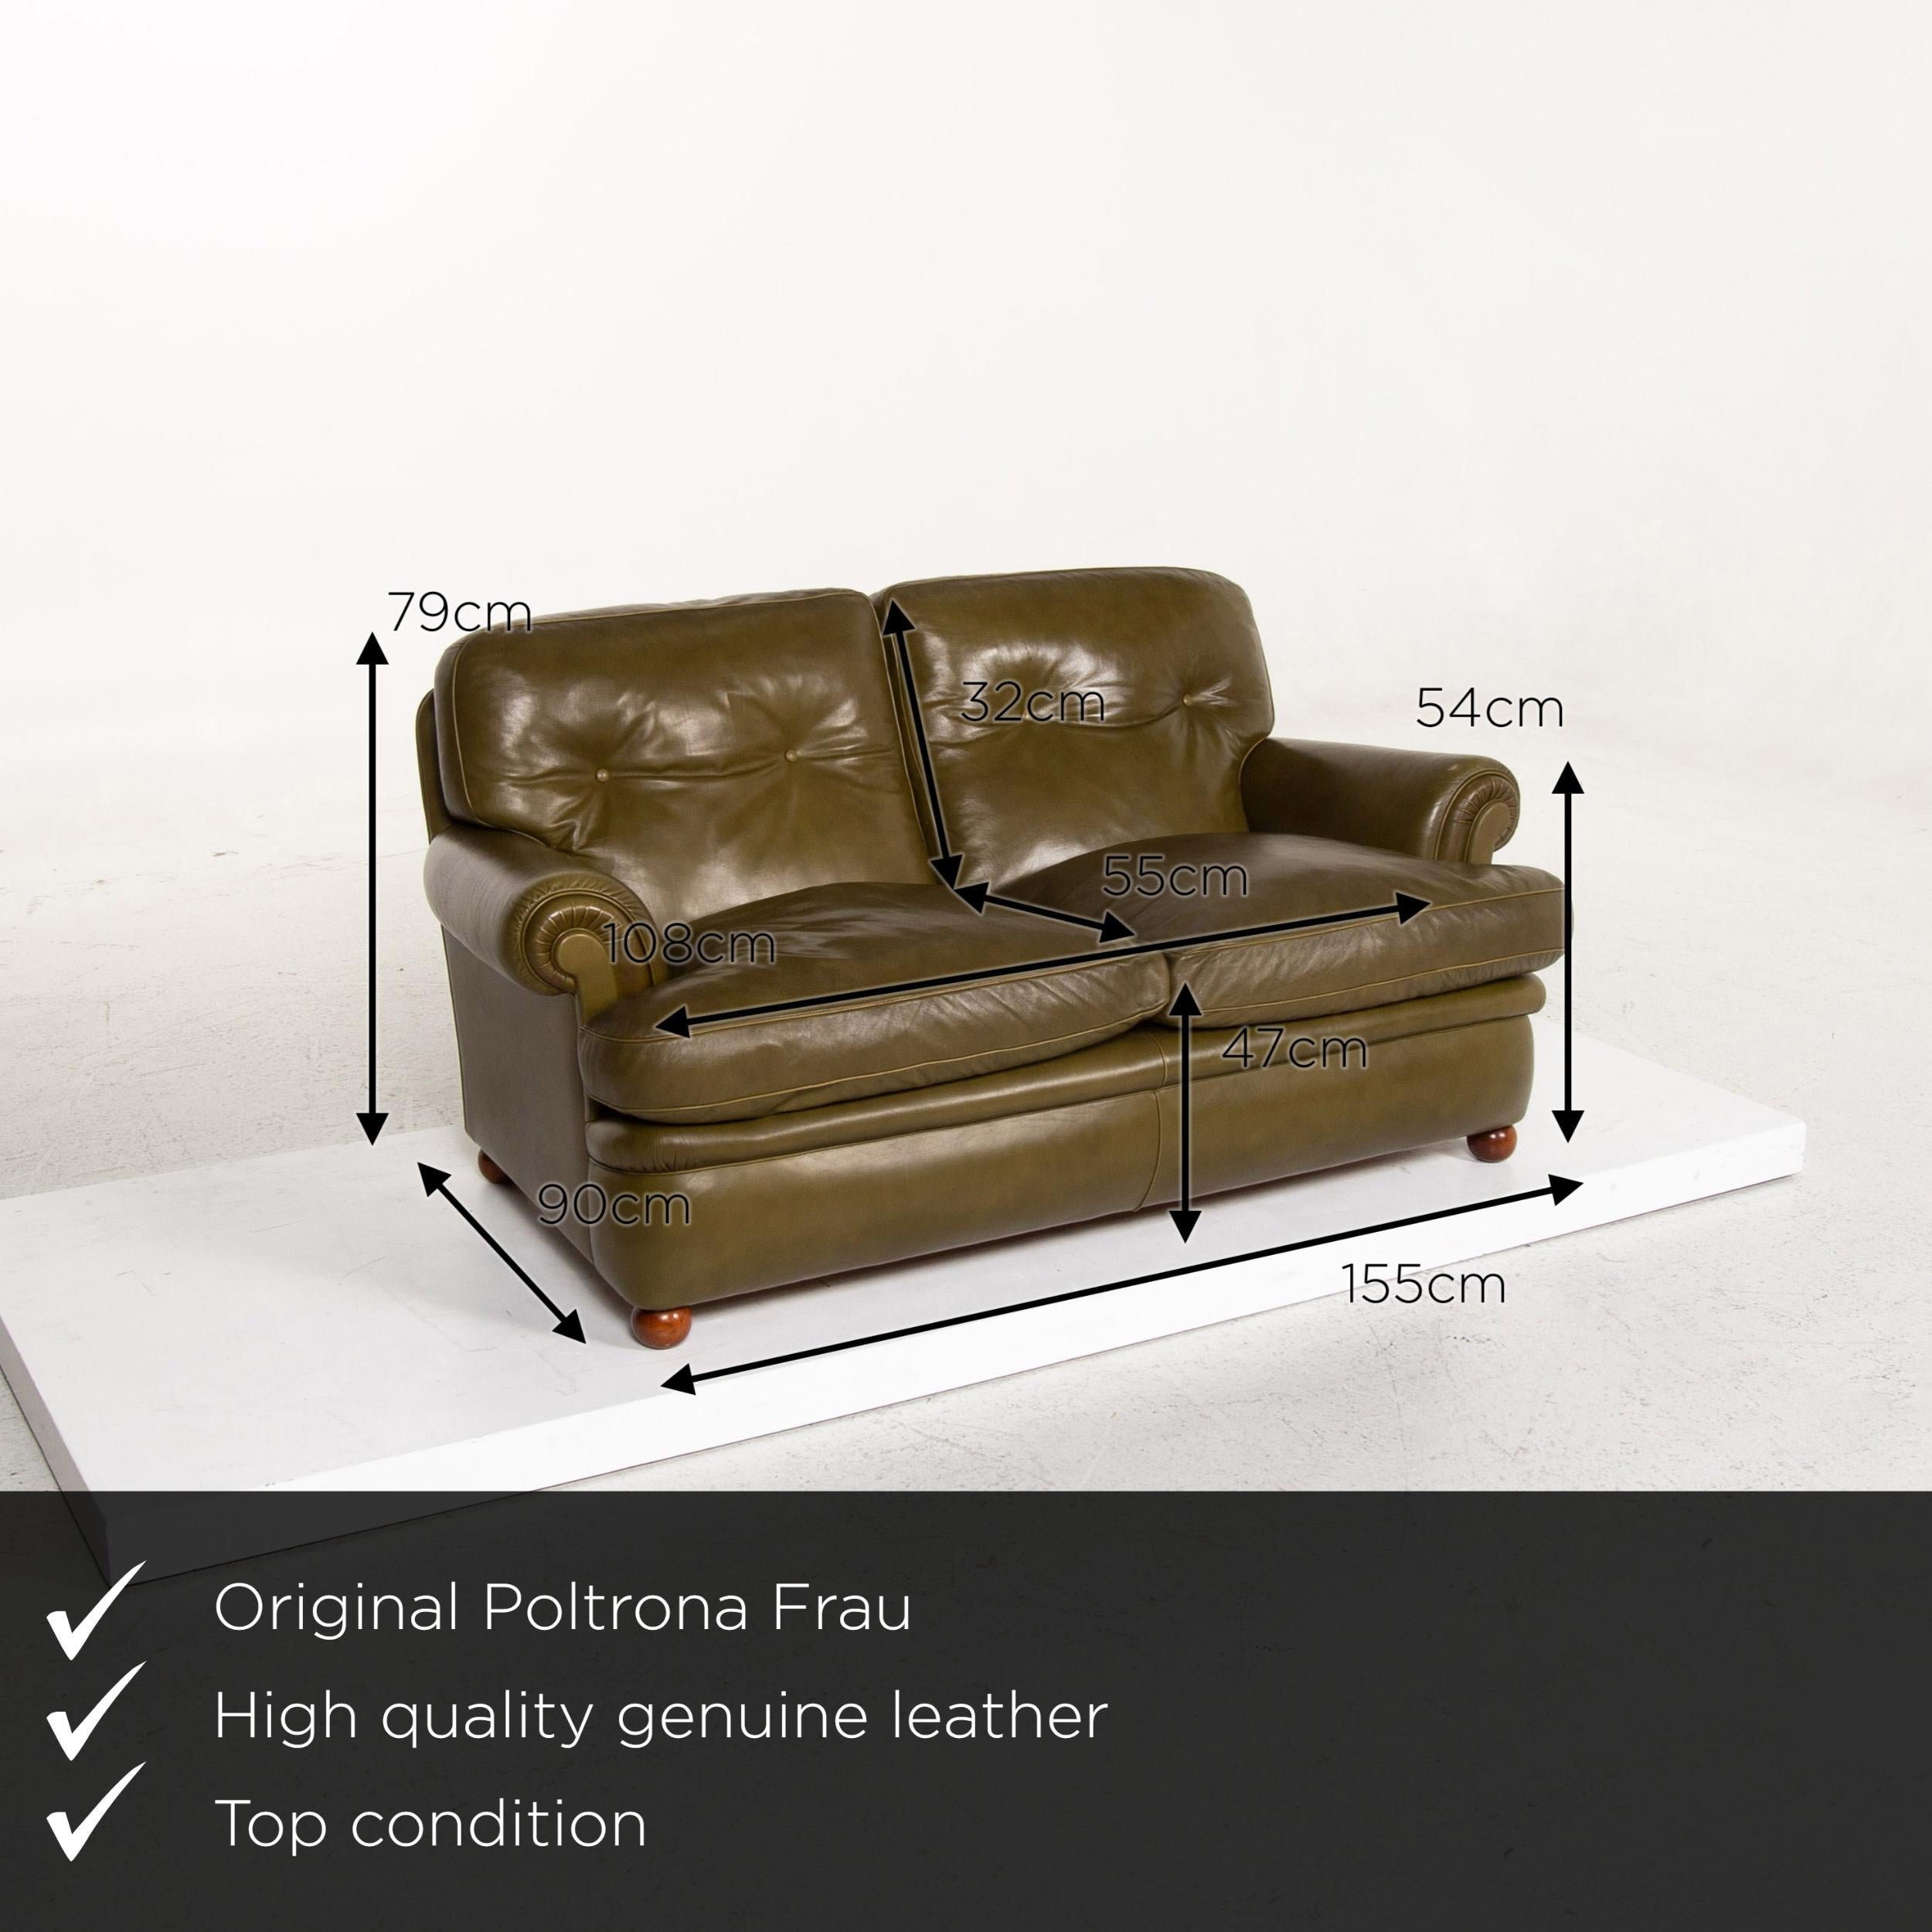 We present to you a Poltrona Frau leather sofa green olive green two-seat couch retro.
  
 

 Product measurements in centimeters:
 

Depth 90
Width 155
Height 79
Seat height 47
Rest height 54
Seat depth 55
Seat width 108
Back height